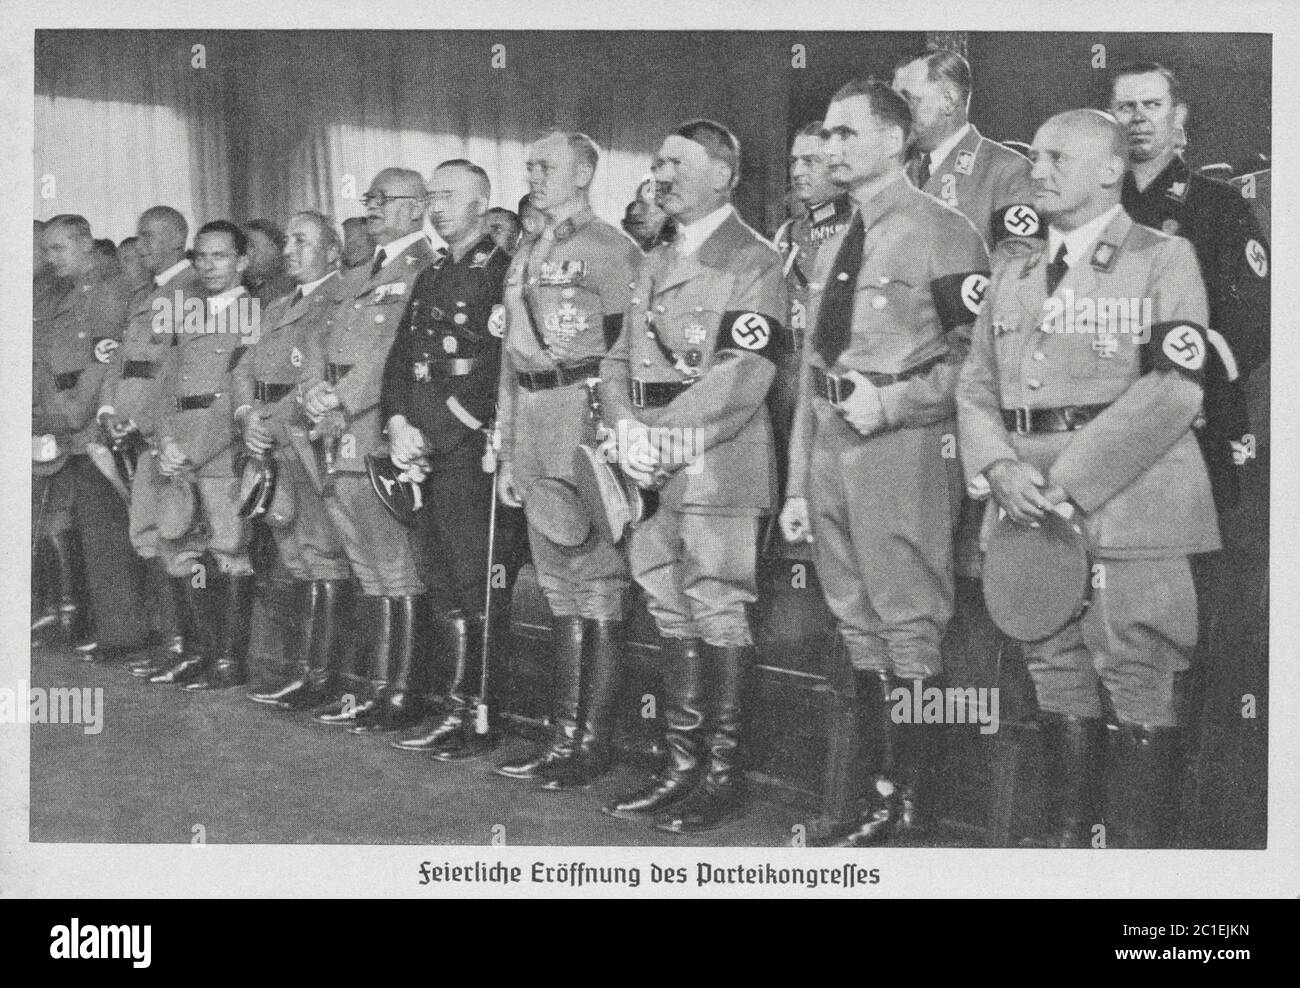 Goebbels, Himmler, Hitler, Hess at the opening of the Congress of the Nazi party in Nuremberg. Germany, 1936 Stock Photo